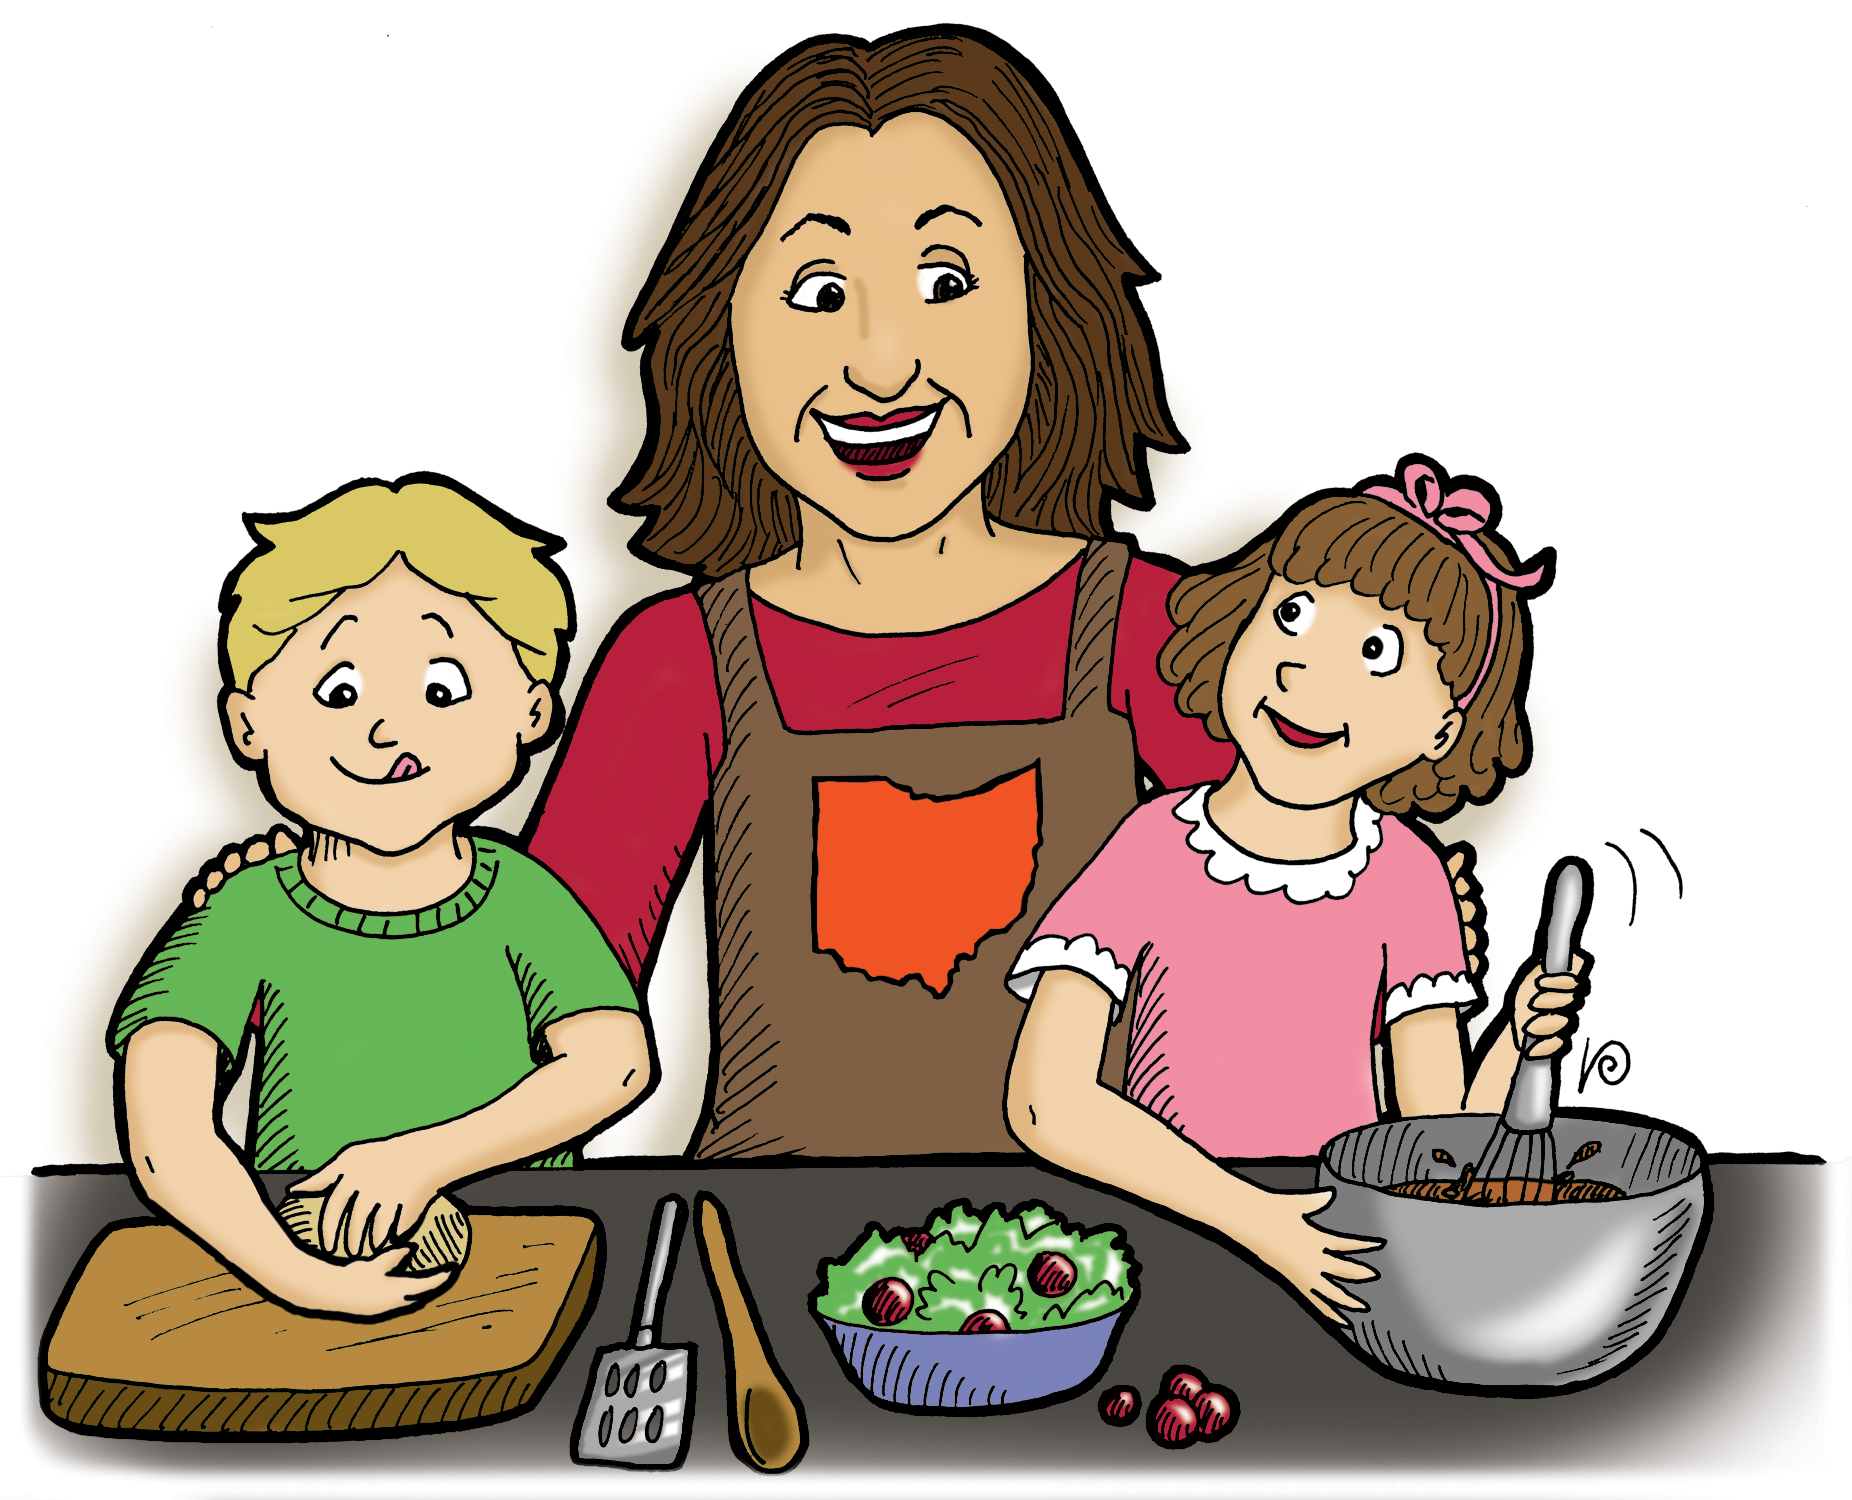 Free Cooking Images, Download Free Cooking Images png images, Free